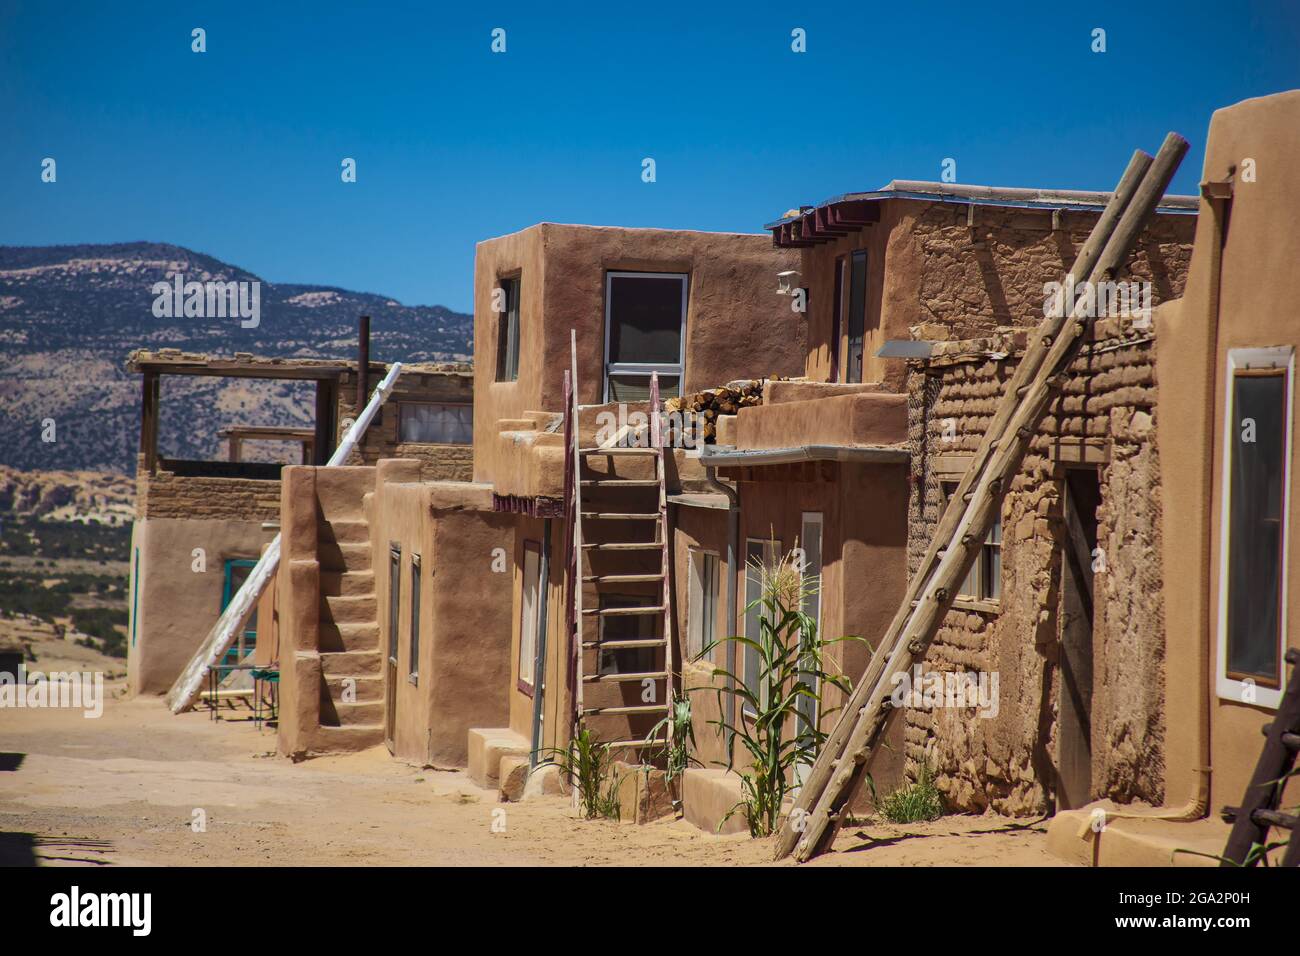 Adobe apartment dwellings in the ancient indigenous community of Acoma Pueblo with doors and windows installed over the years. The Acoma people sti... Stock Photo